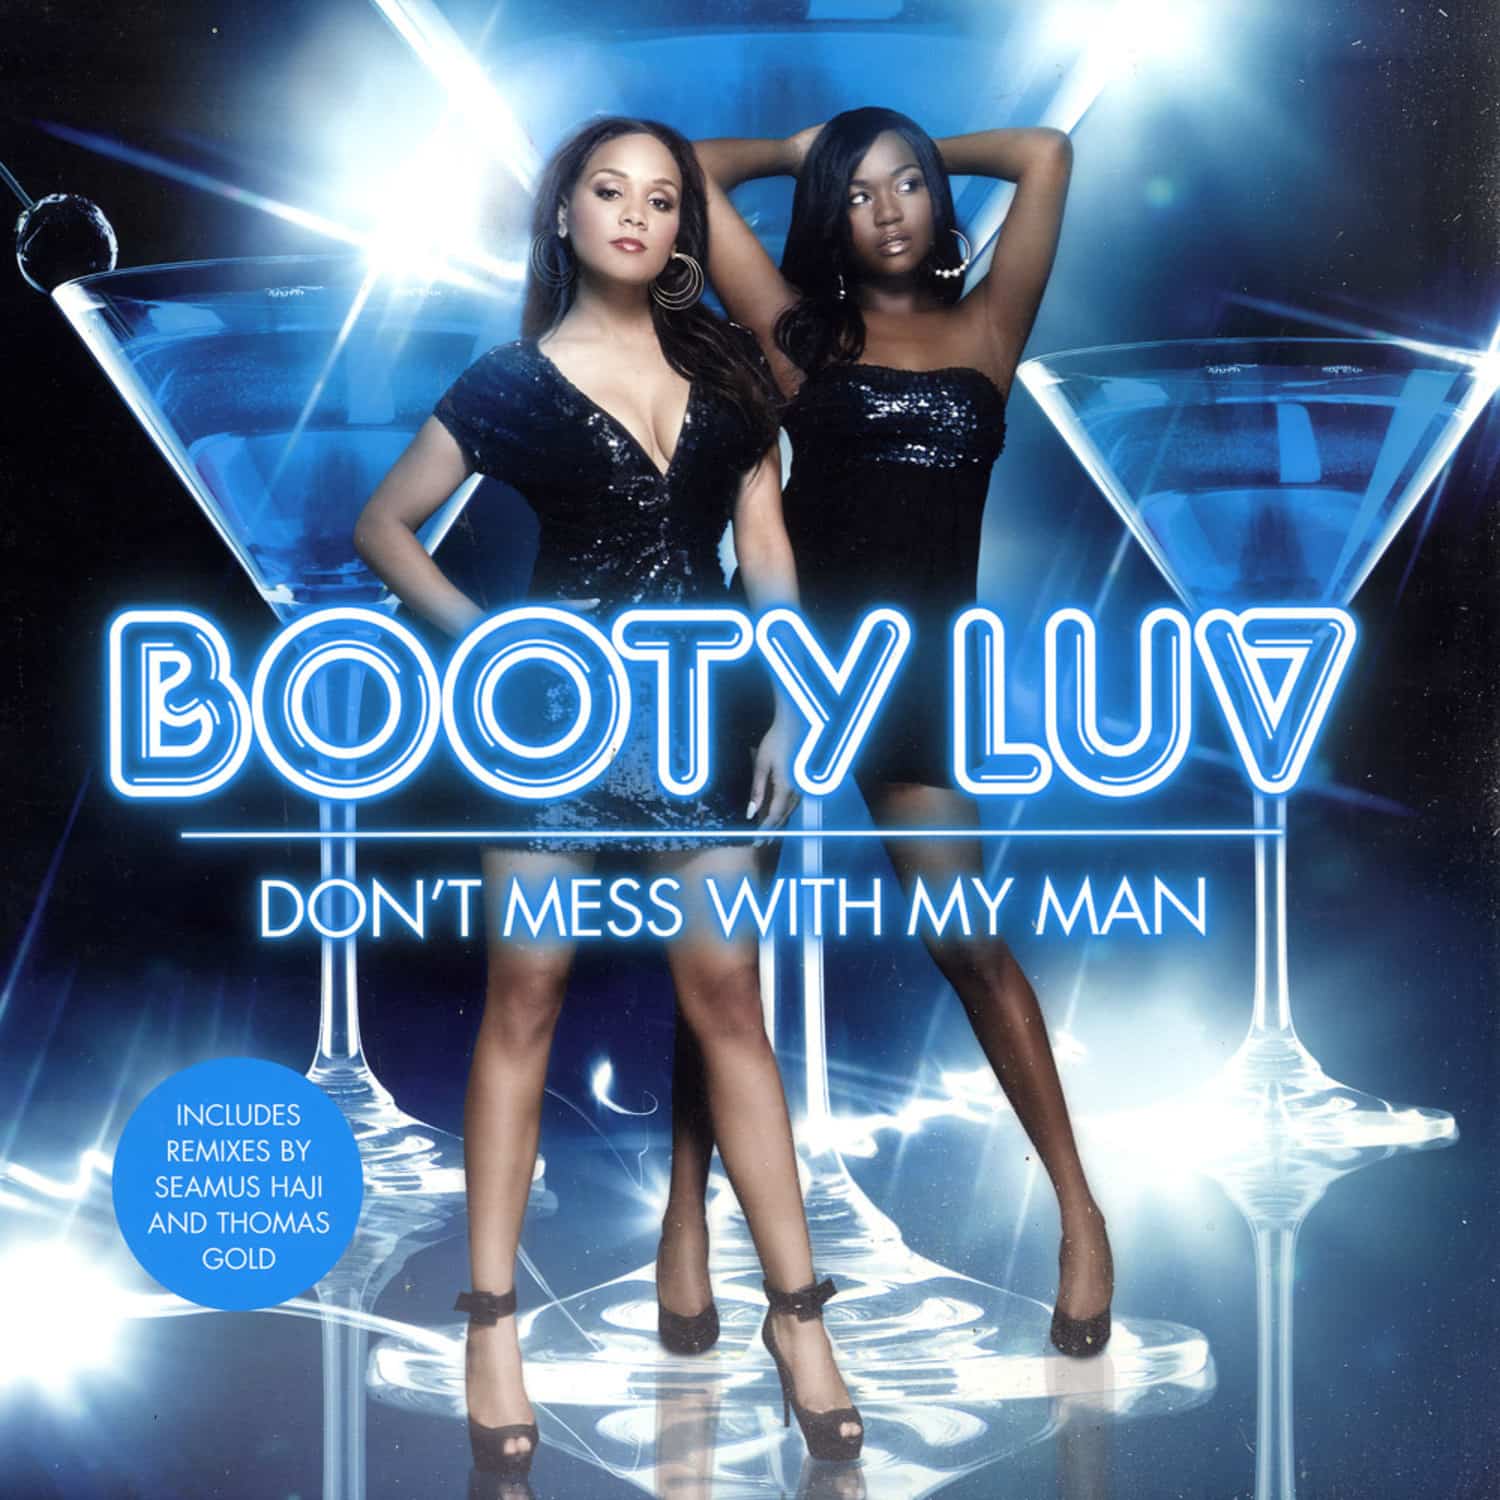 Booty Luv - DONT MESS WITH MY MAN